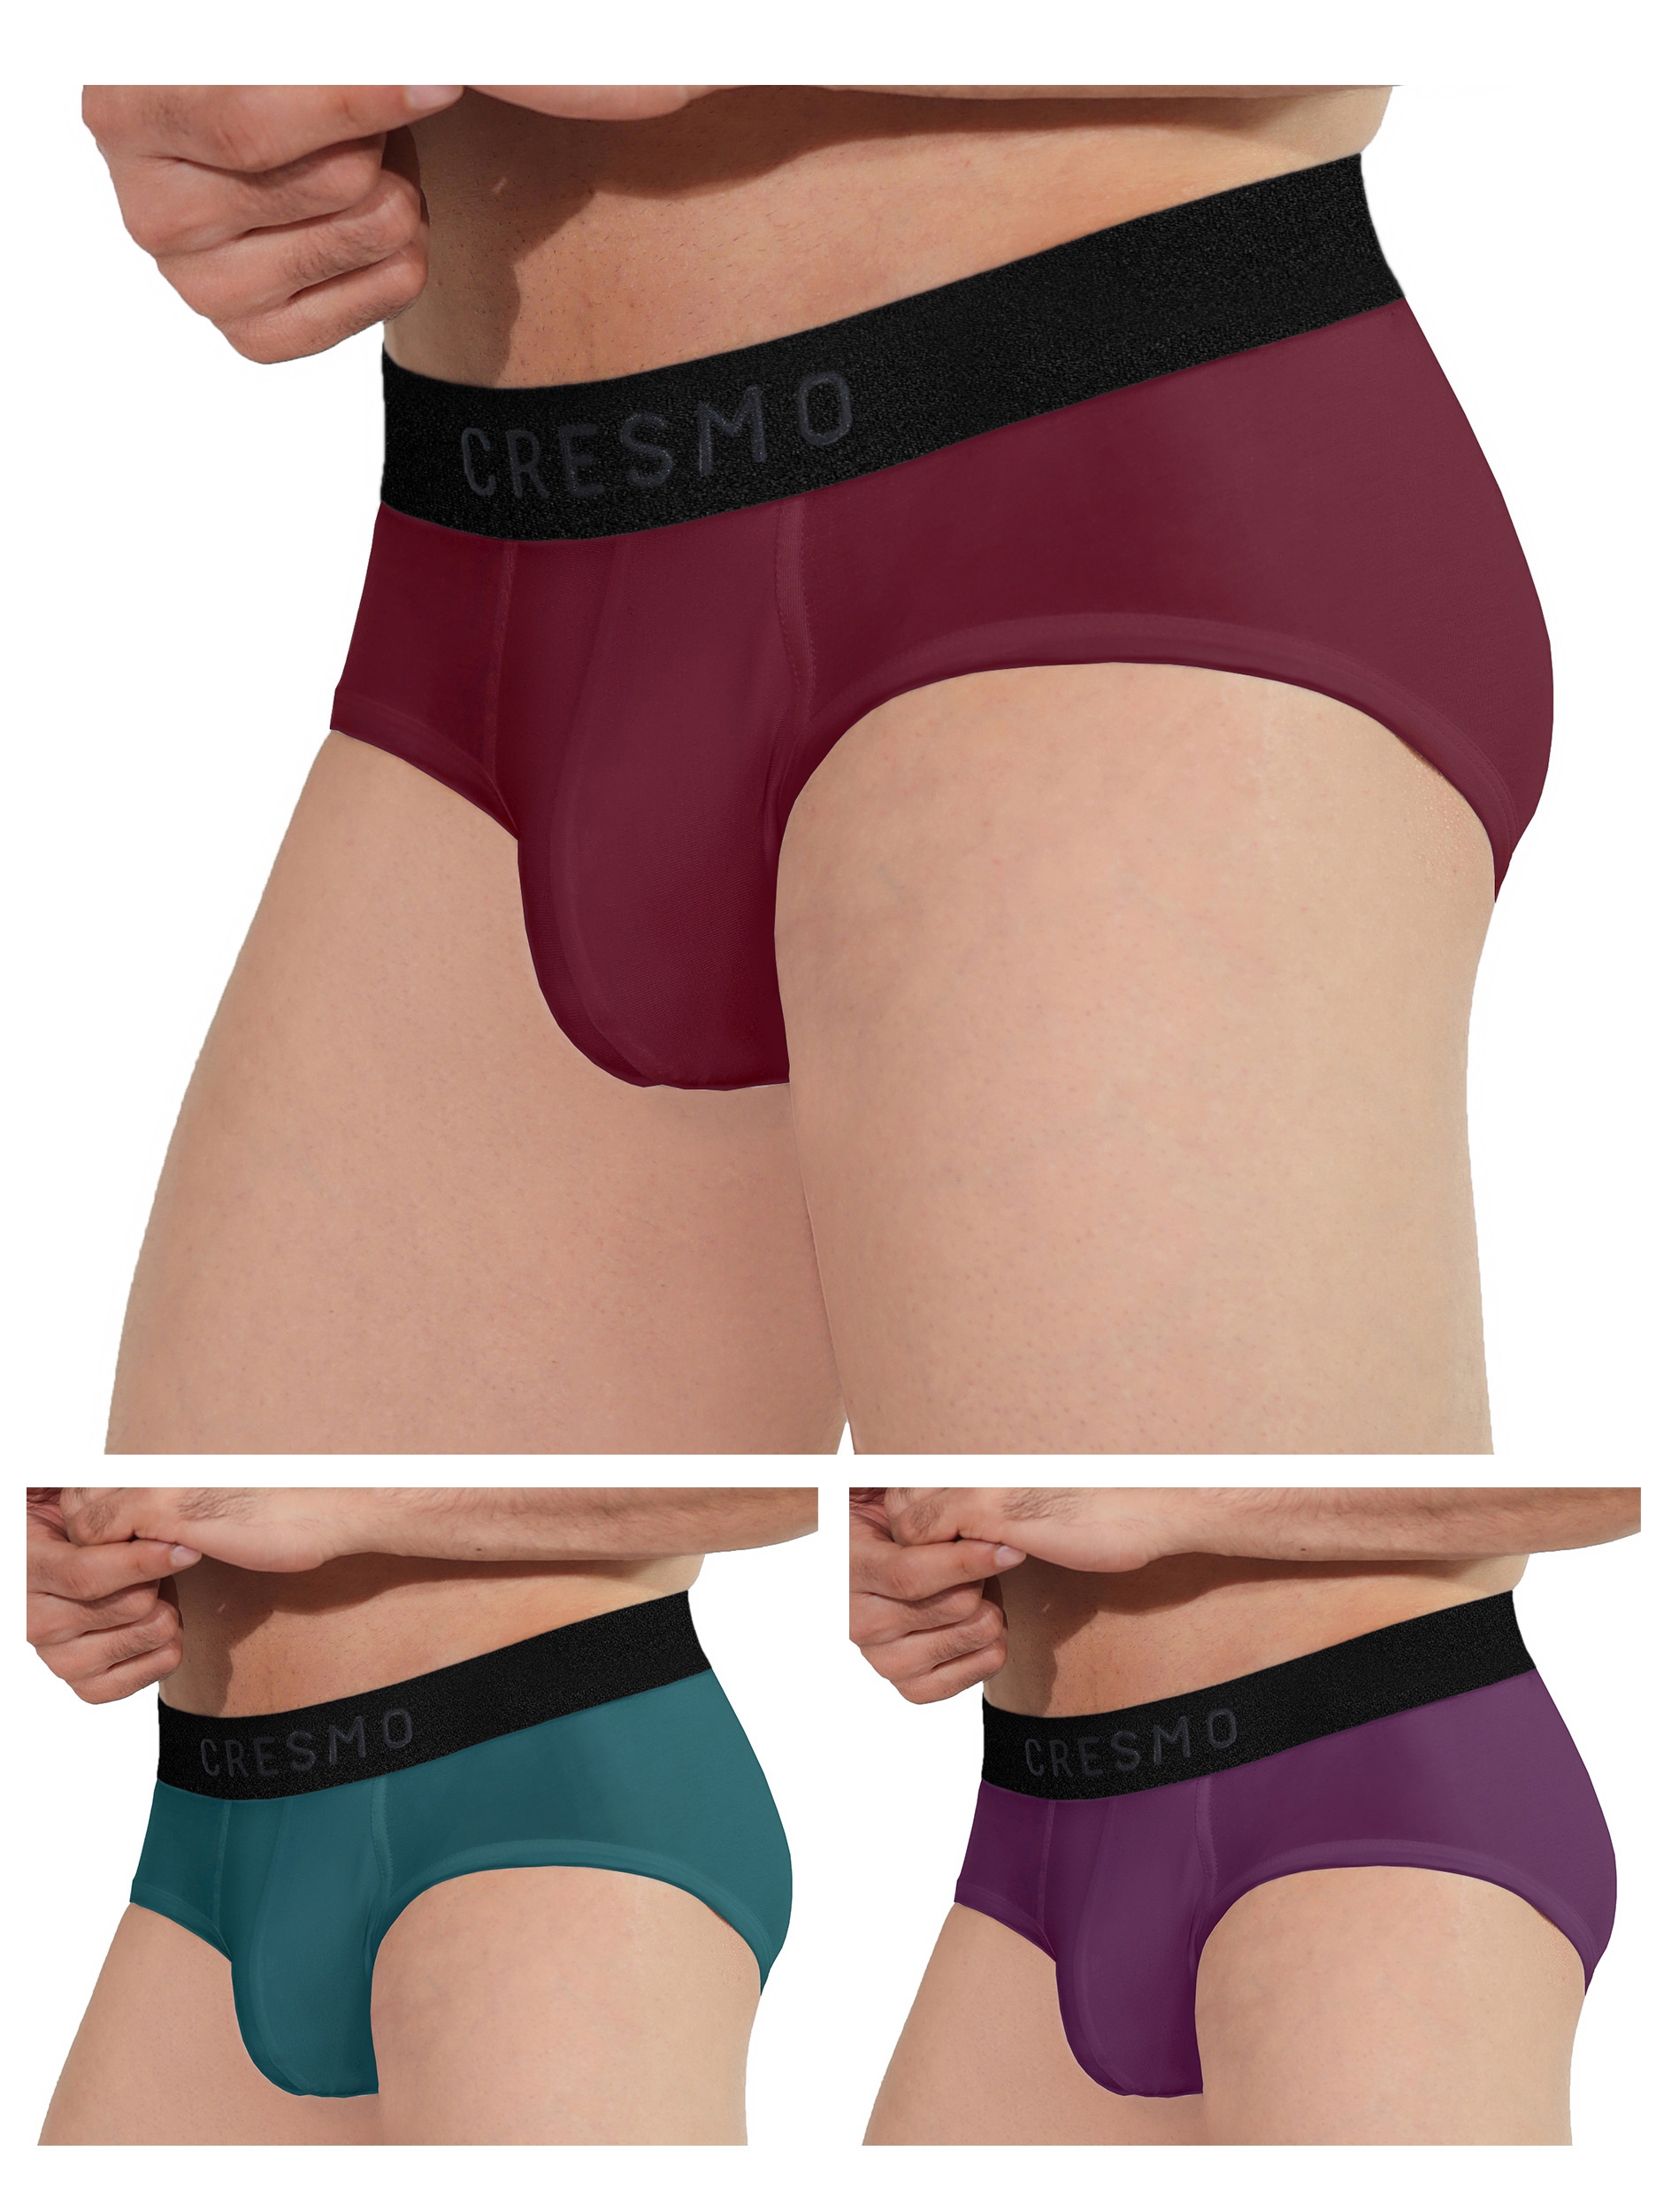 CRESMO | CRESMO Men's Anti-Microbial Micro Modal Underwear Breathable Ultra Soft Comfort Lightweight Brief (Pack of 3)